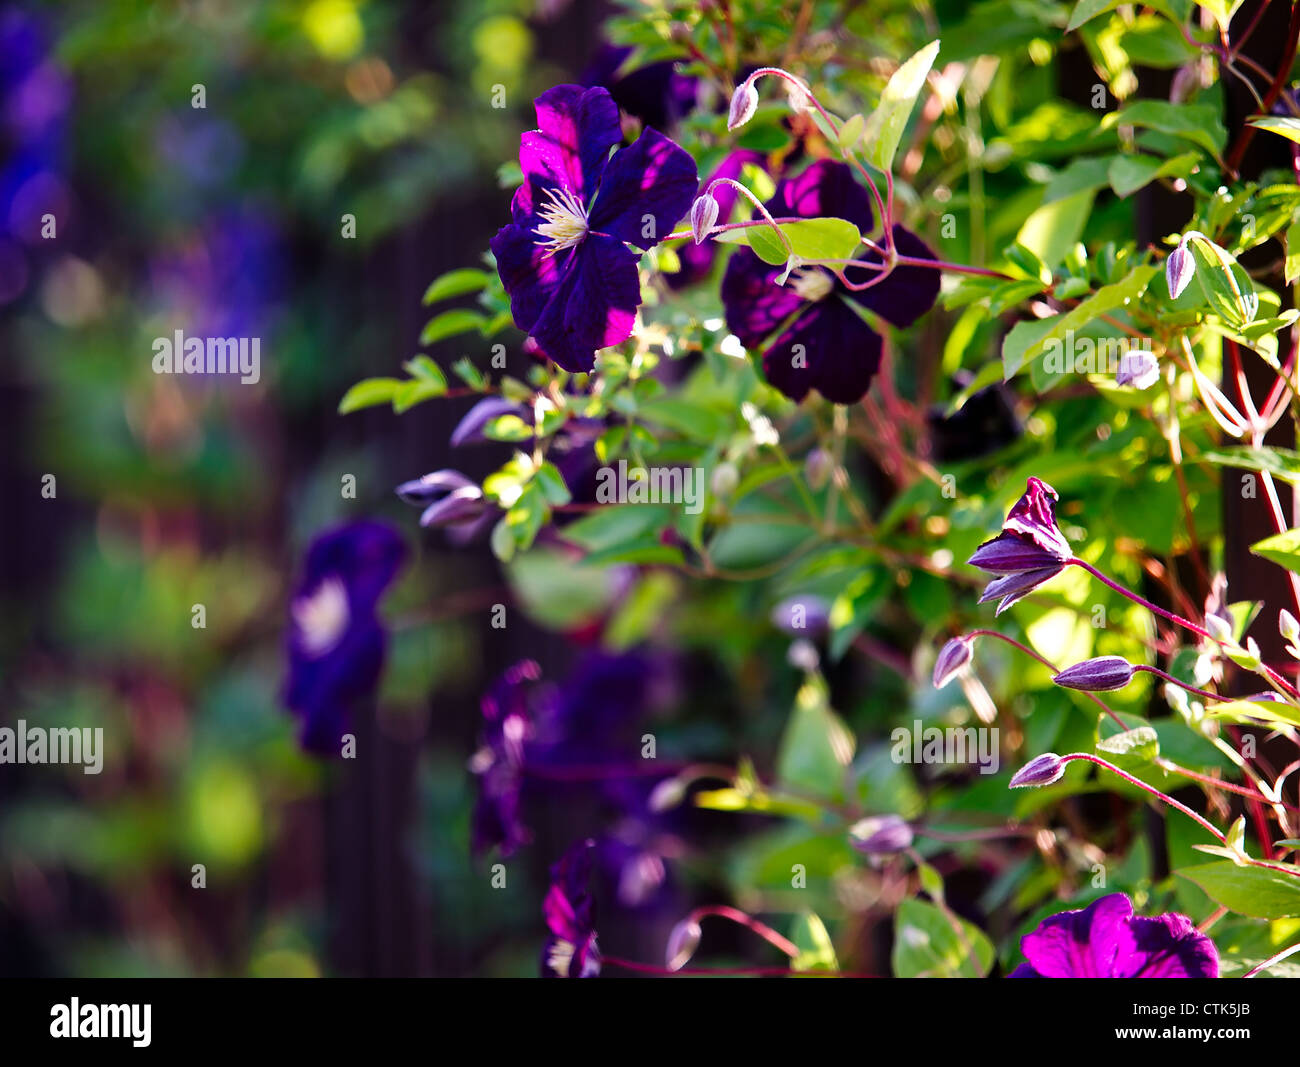 Close up shot of the  Etoile Violette clematis flower on a fence. Stock Photo